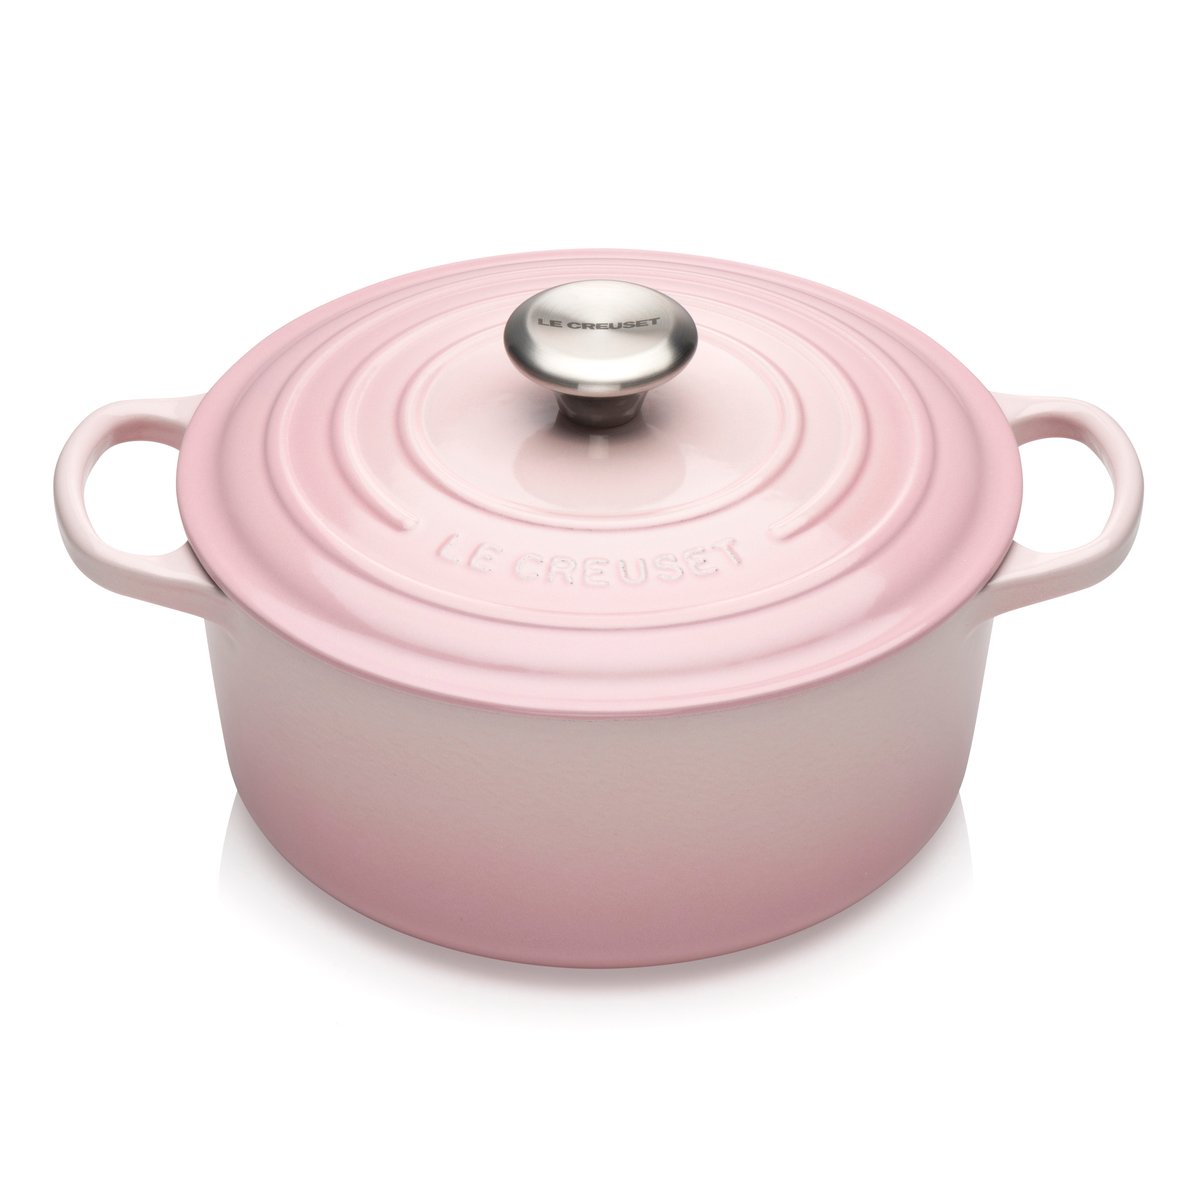 Le Creuset Le Creuset ronde braadpan 4,2 L Shell pink